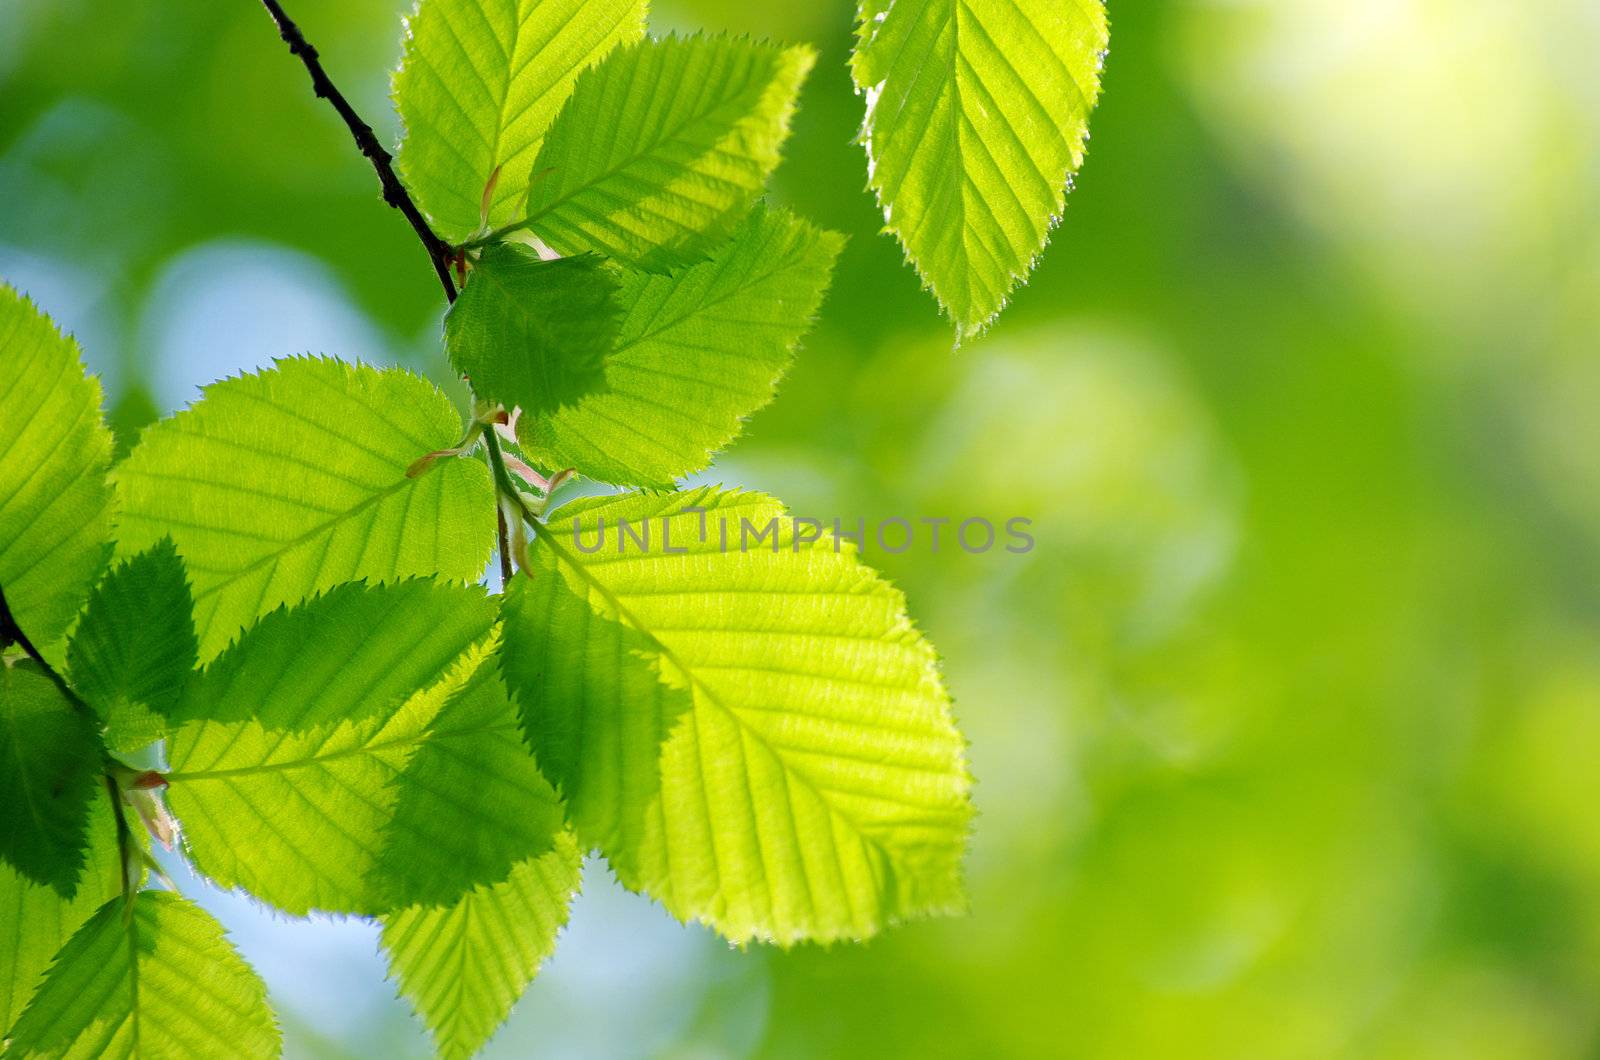 spring green leaves background in a sunny day